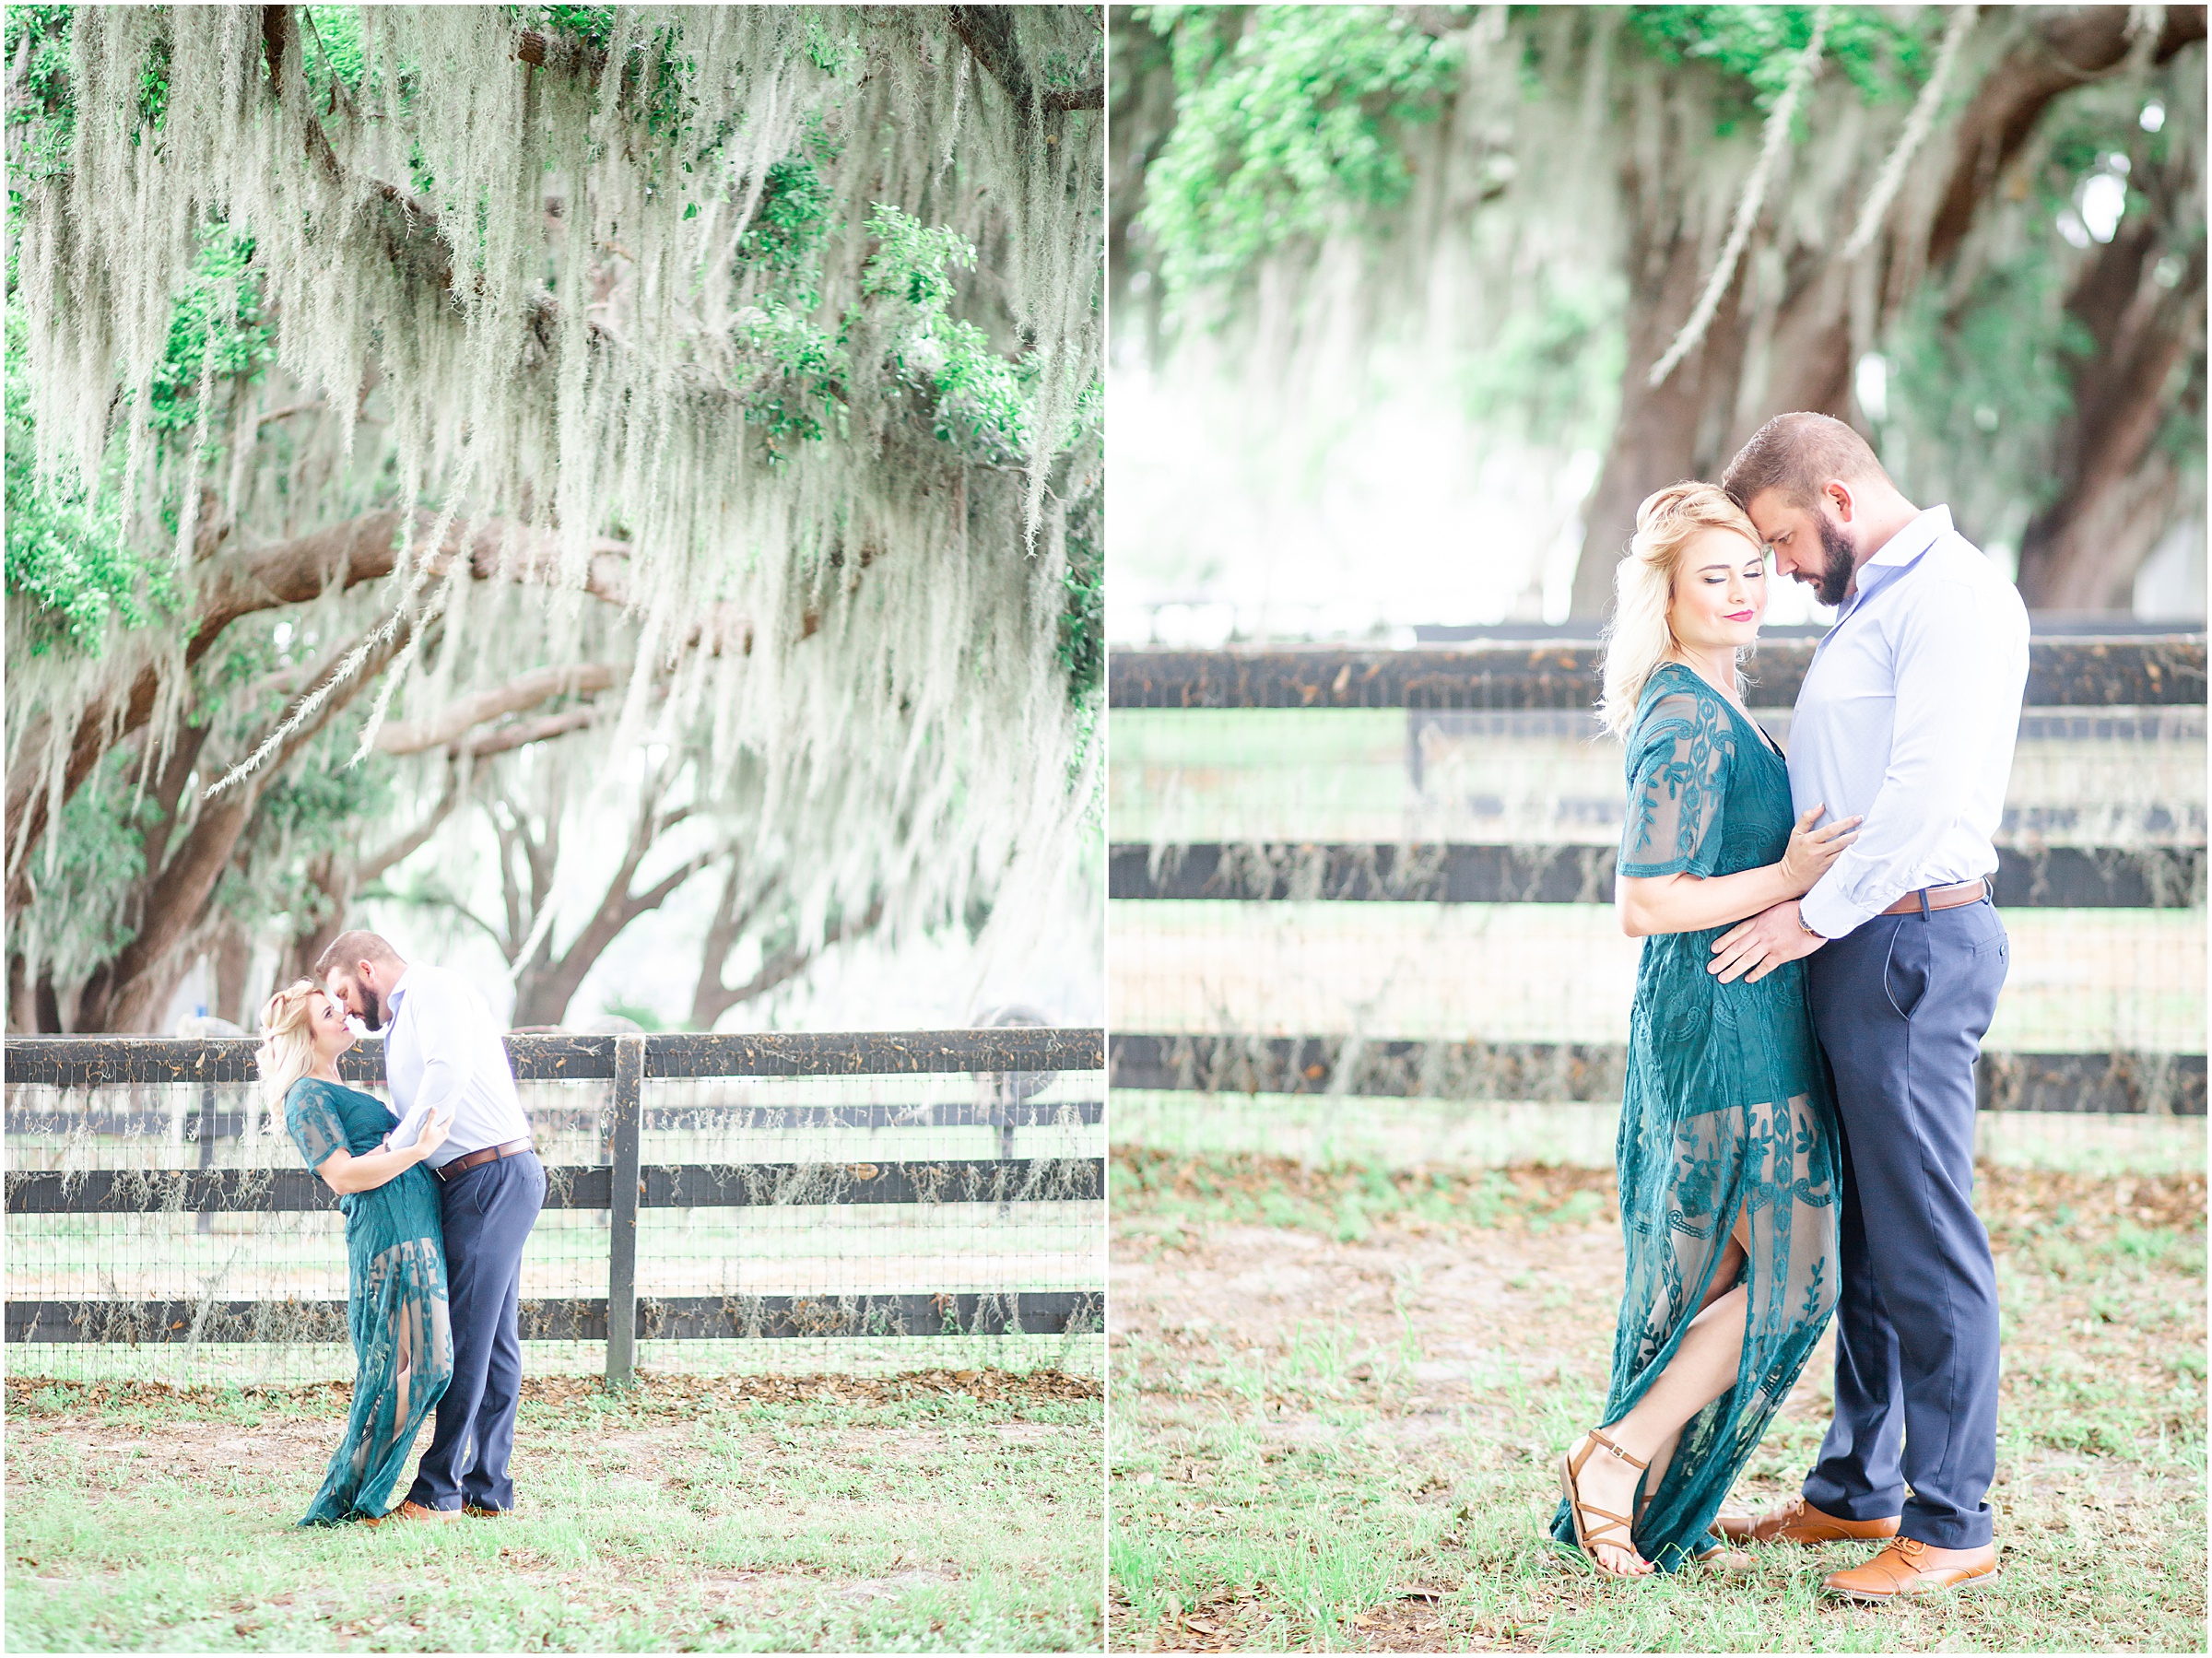 Couple engaged for 3 years, Brooke & Jeremy take engagement pictures at Covington Farms in Dade City, Florida.